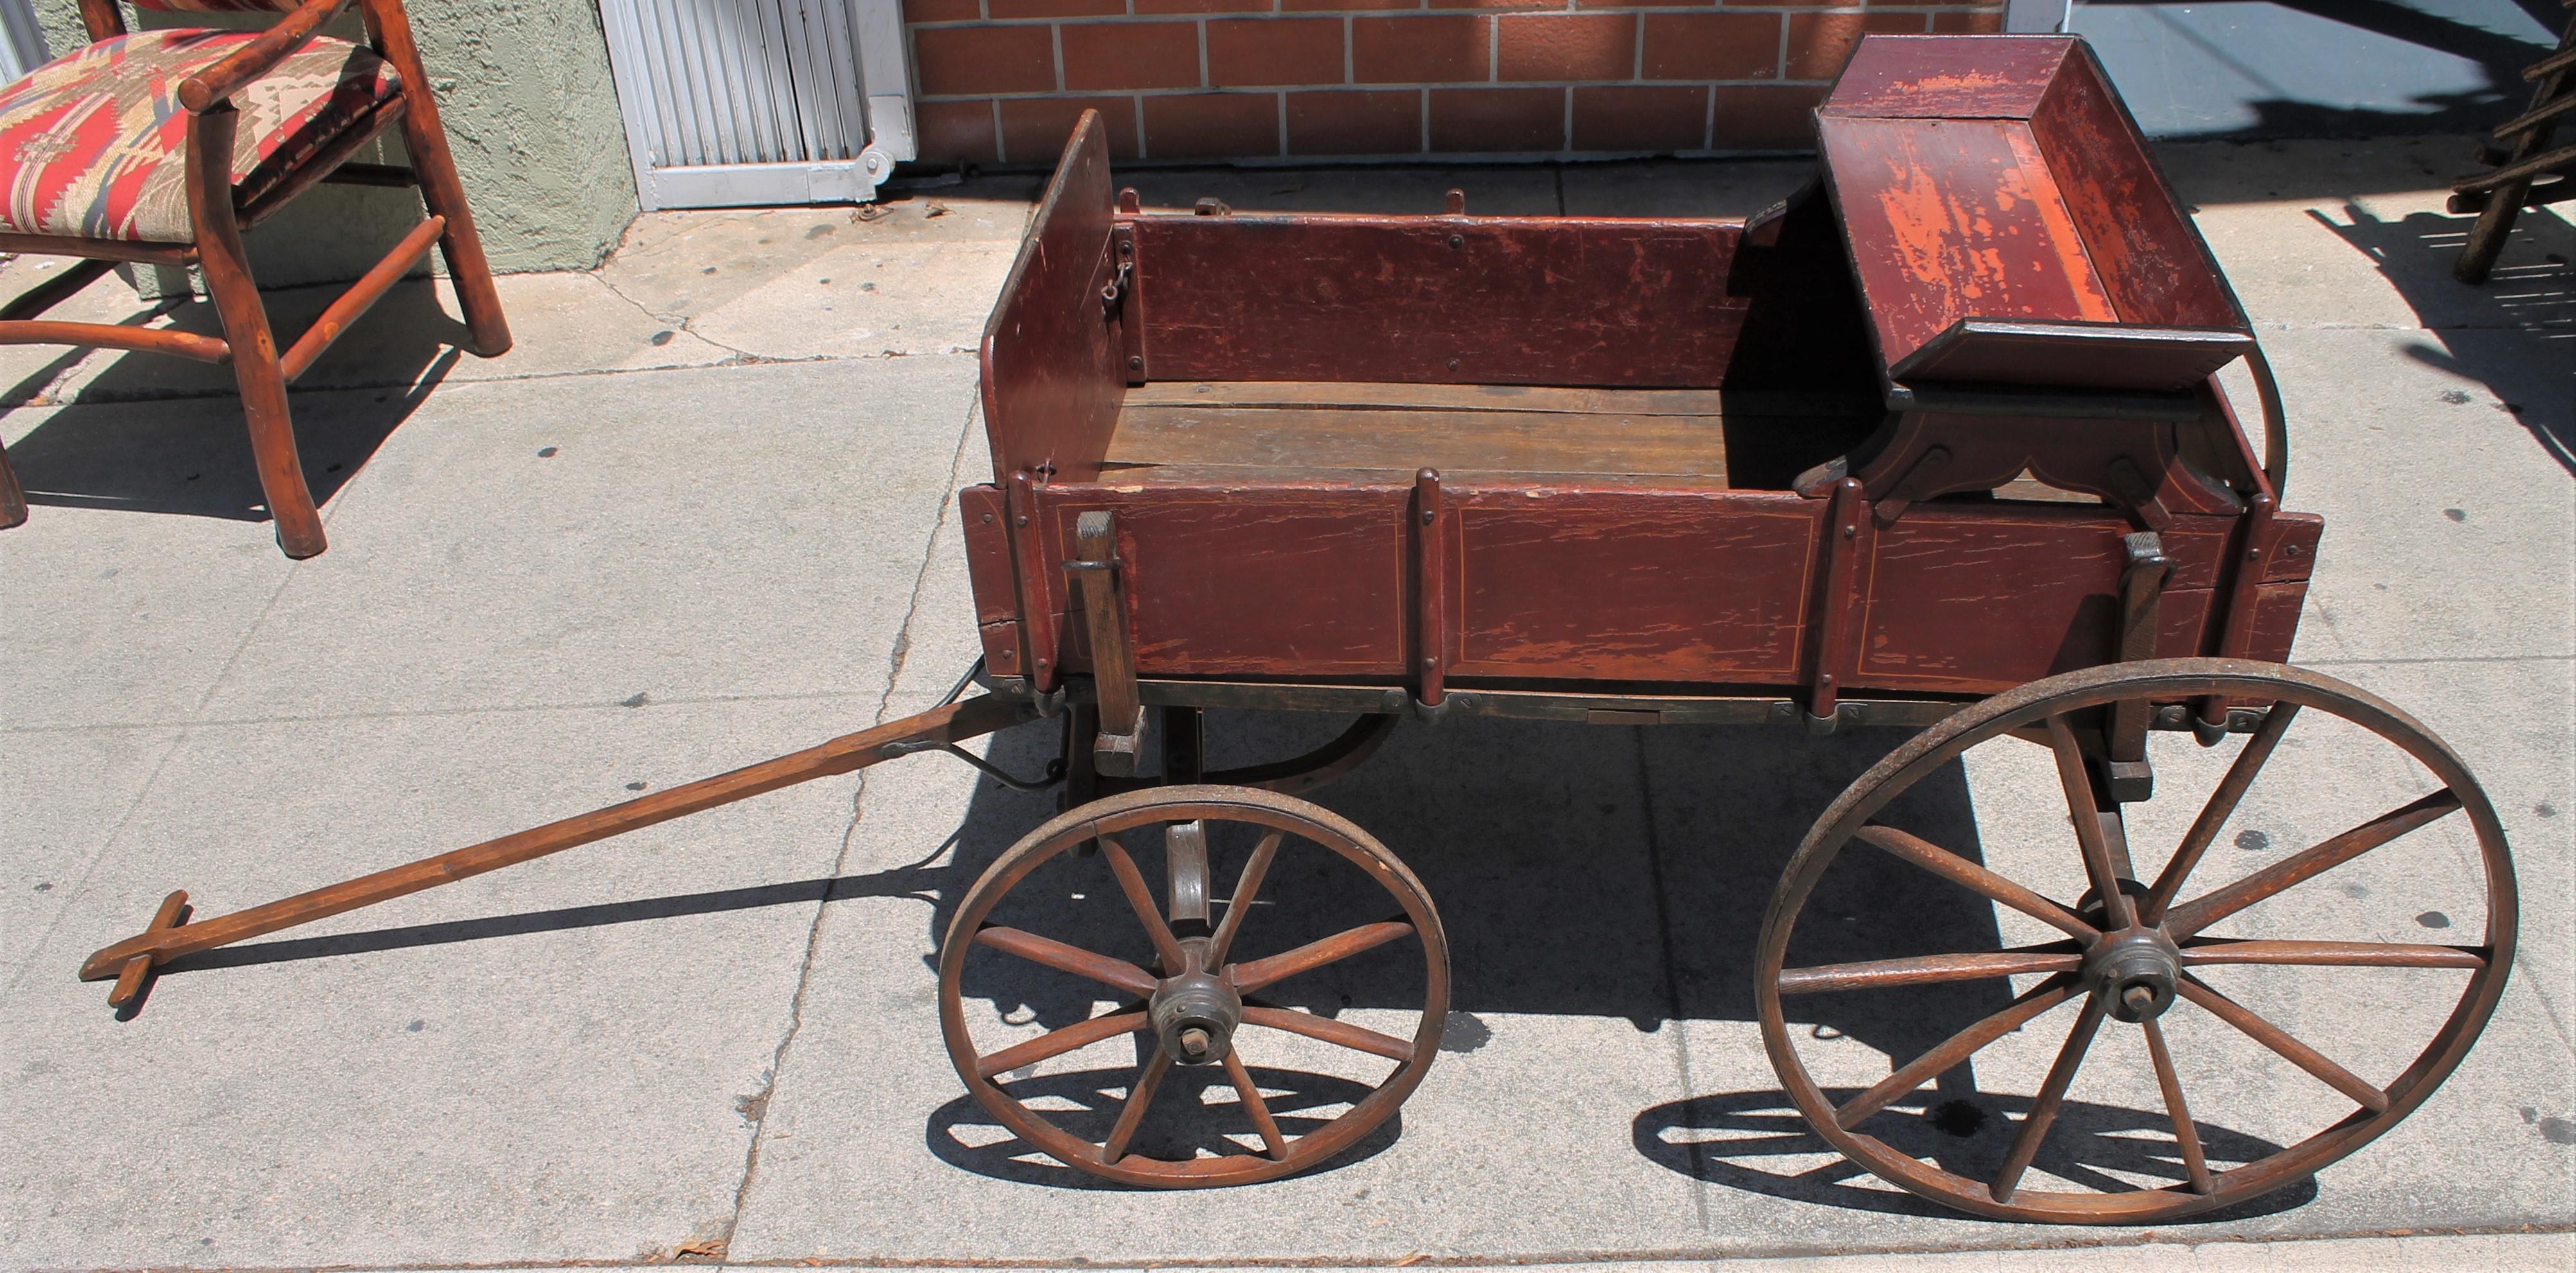 This fine example of Folk Art original painted buggy was probably pulled by a goat or donkey and has a upper child's seat on top. Fantastic pin stripe decorative painting. The buggy is all original and original wheels.